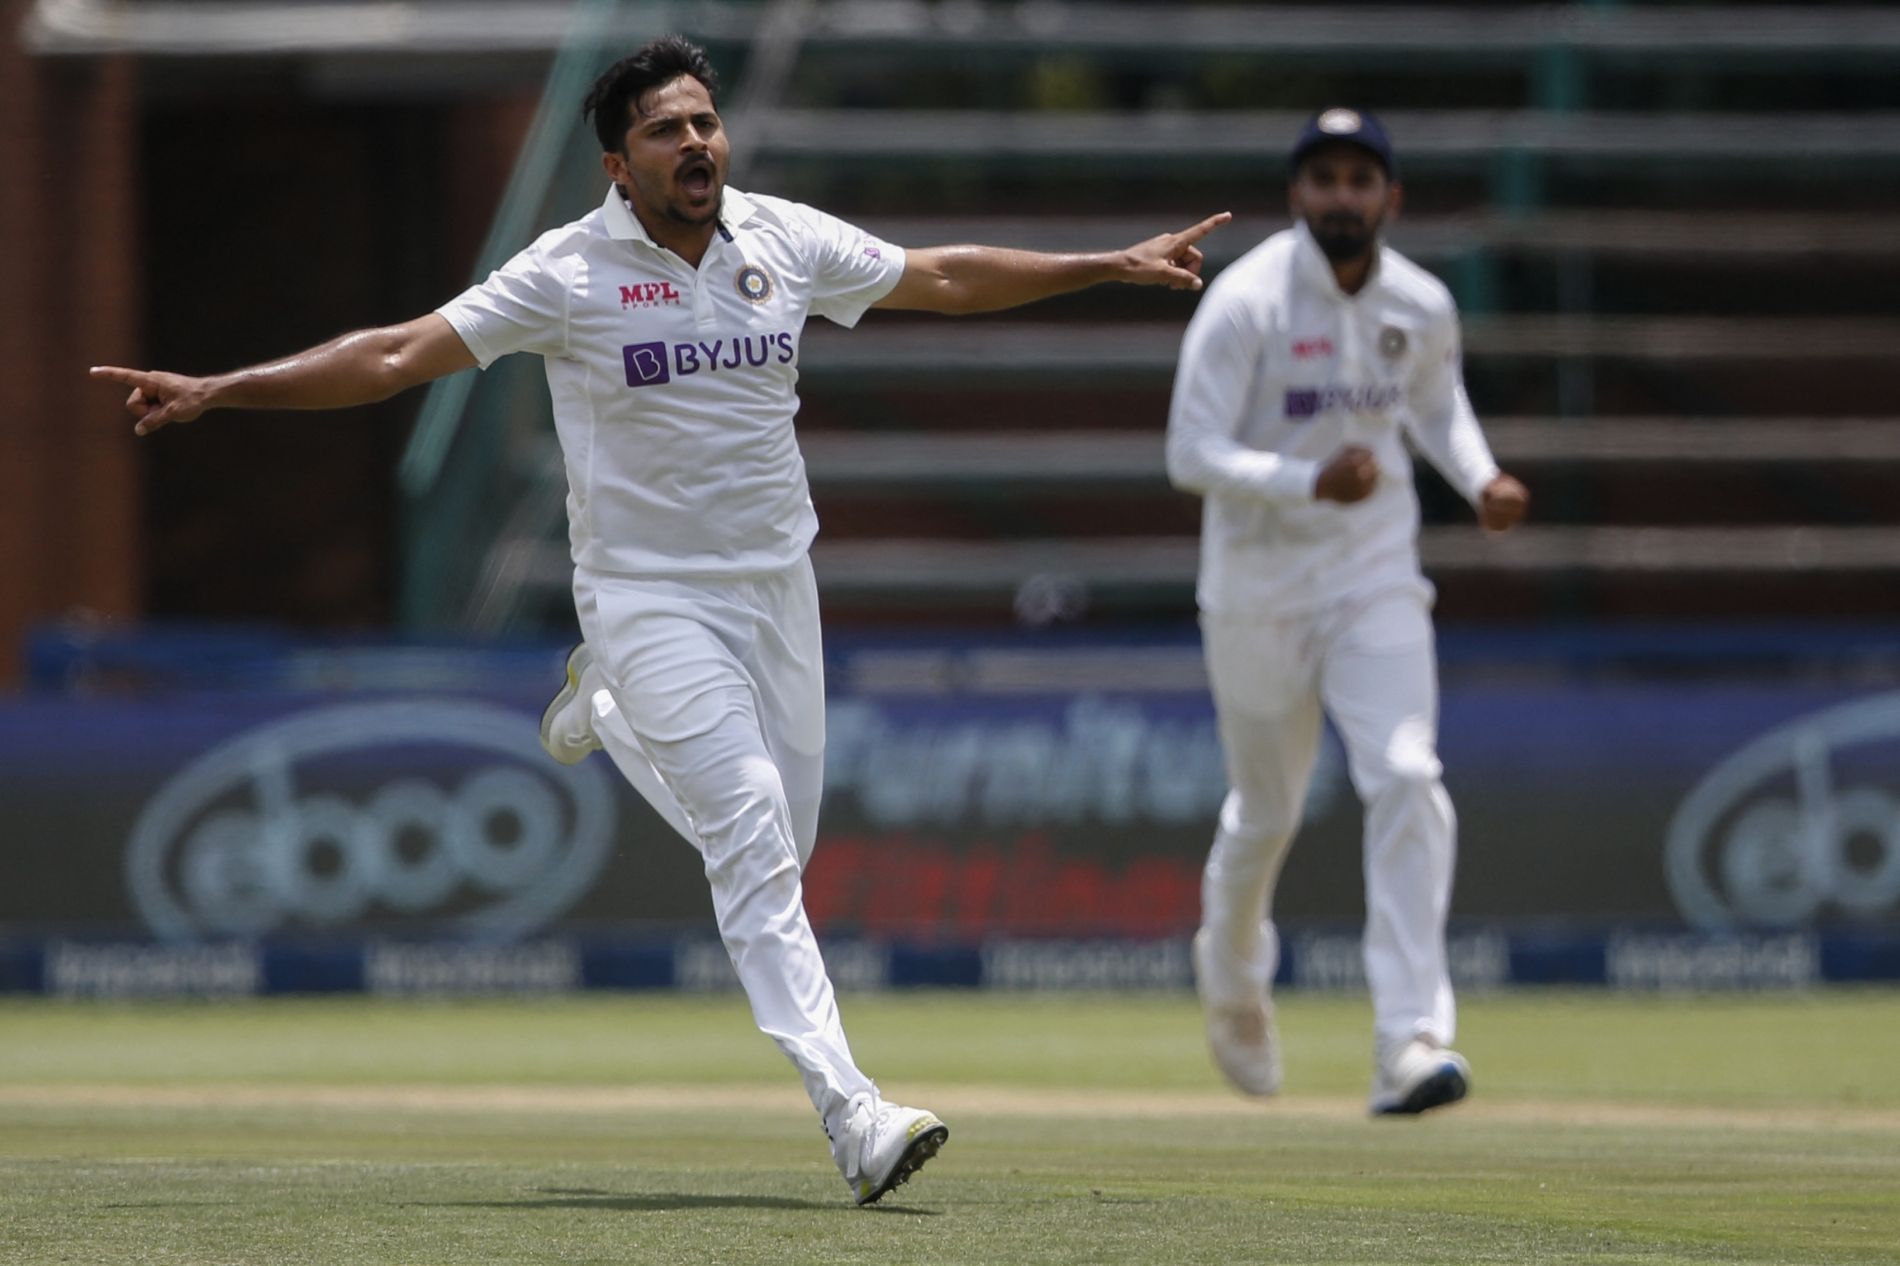 Shardul Thakur celebrates a wicket on Day 2 of the Johannesburg Test. Pic: ICC